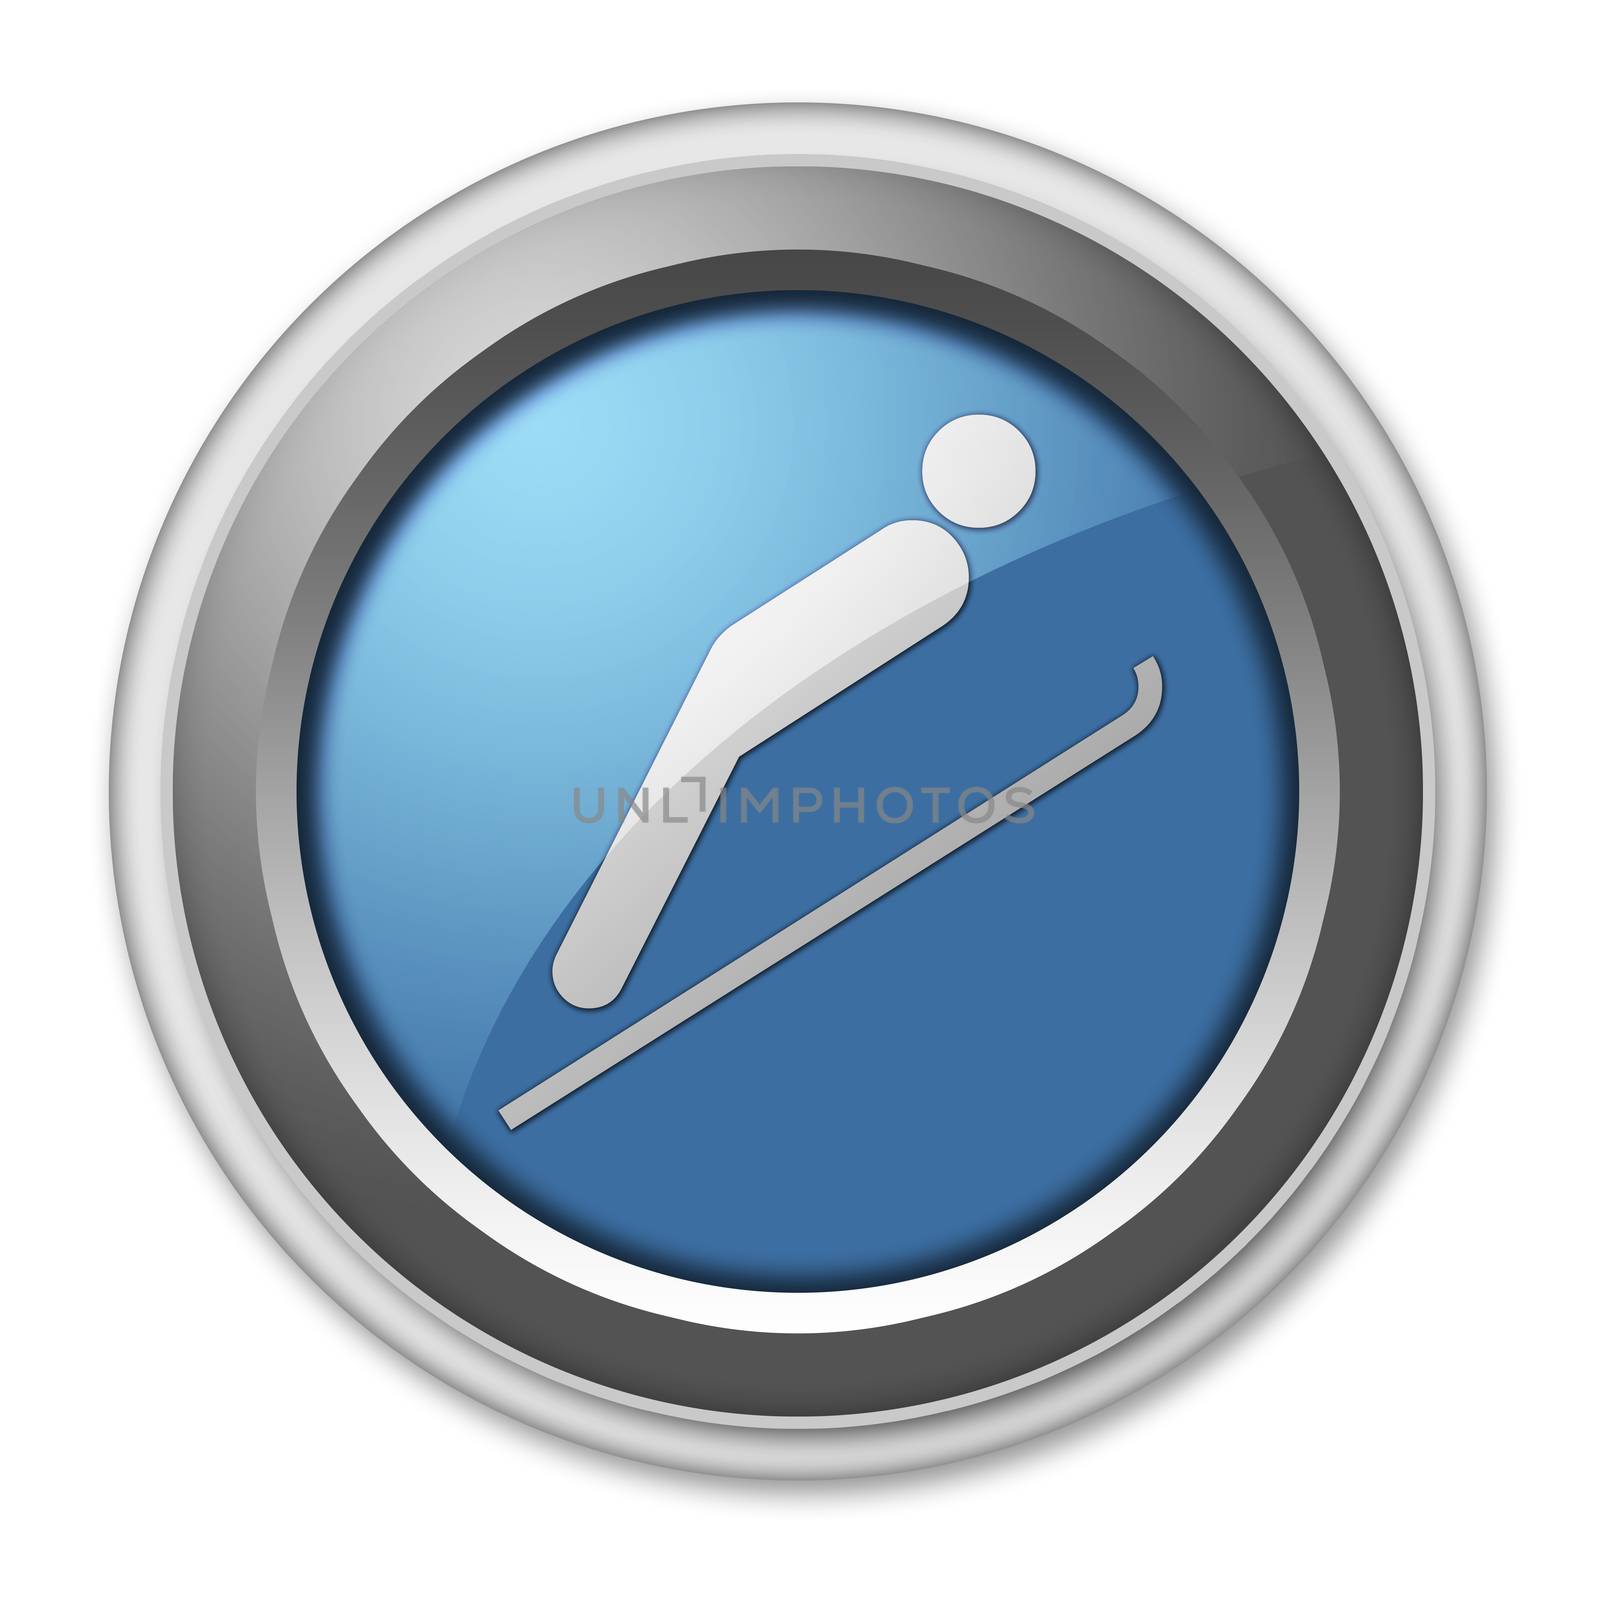 Icon, Button, Pictogram with Ski Jumping symbol